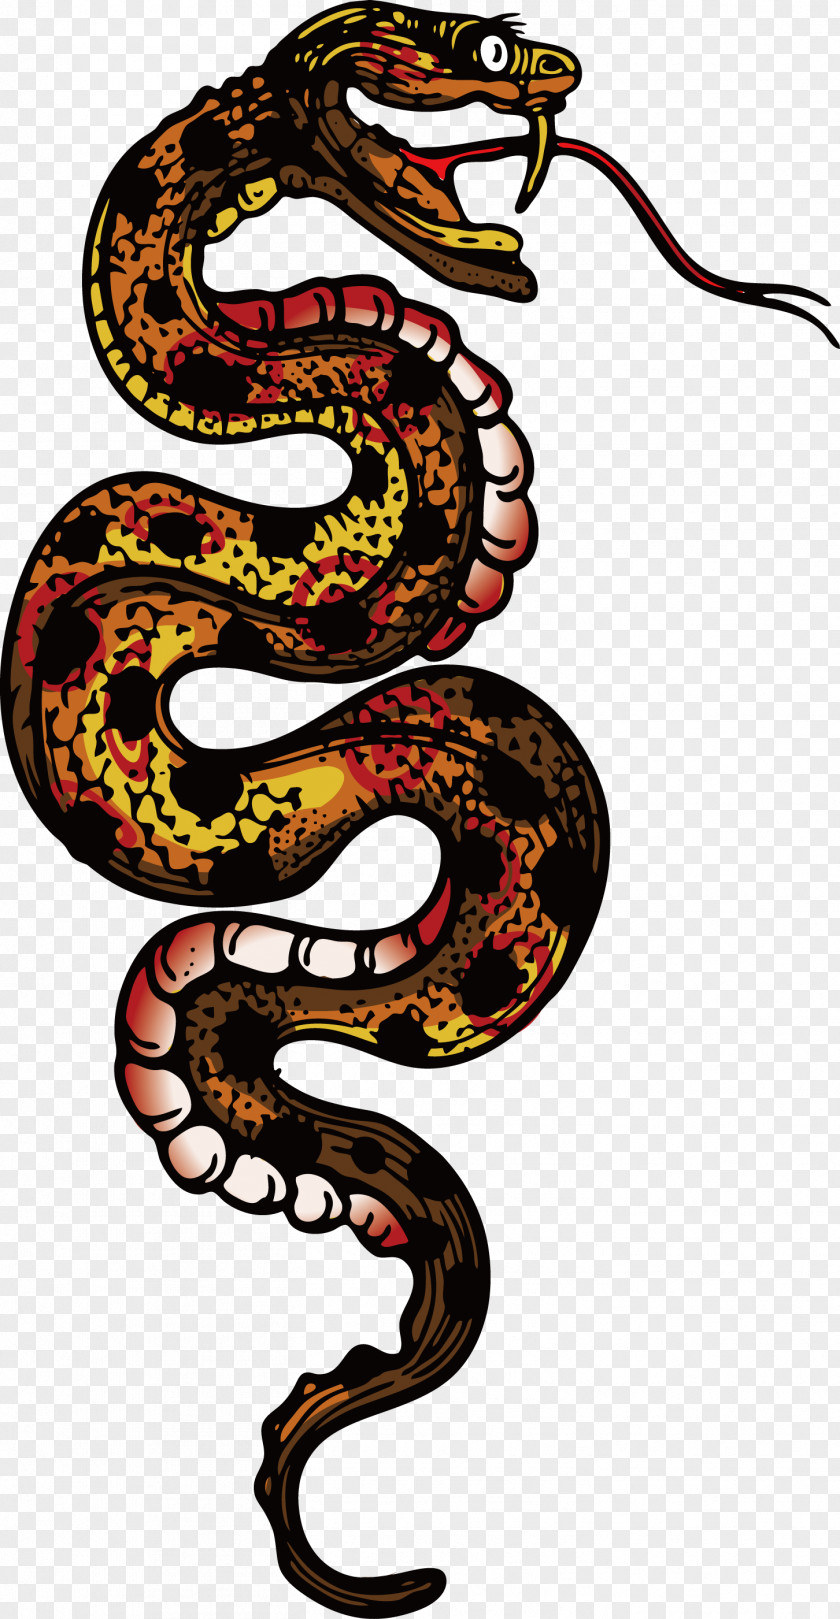 Decorative Snakes Boa Constrictor Vipers Kingsnakes PNG